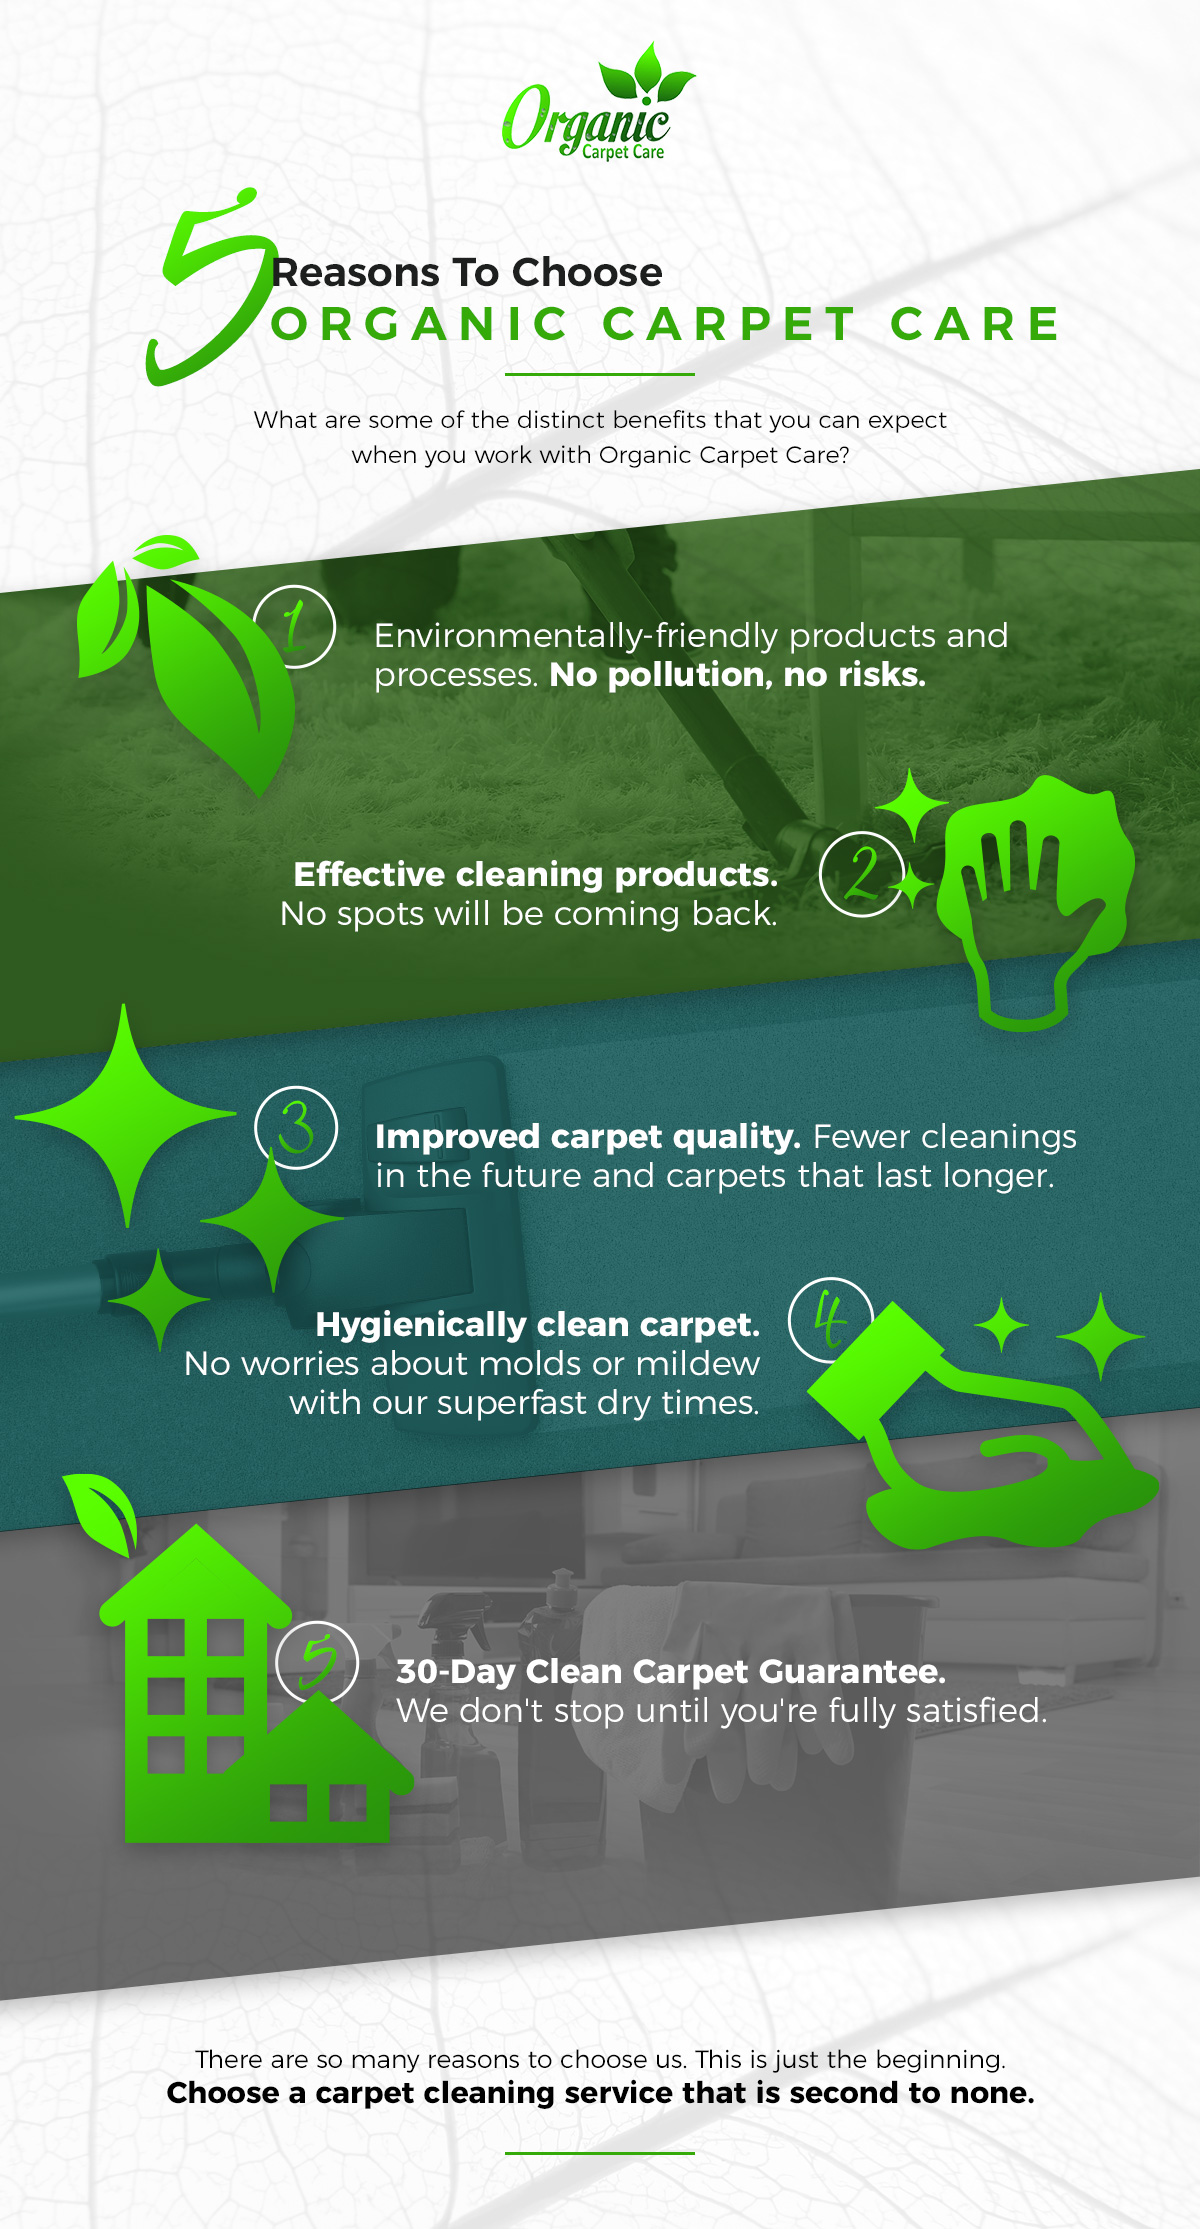 5 Reasons to Choose Organic Carpet Care infographic